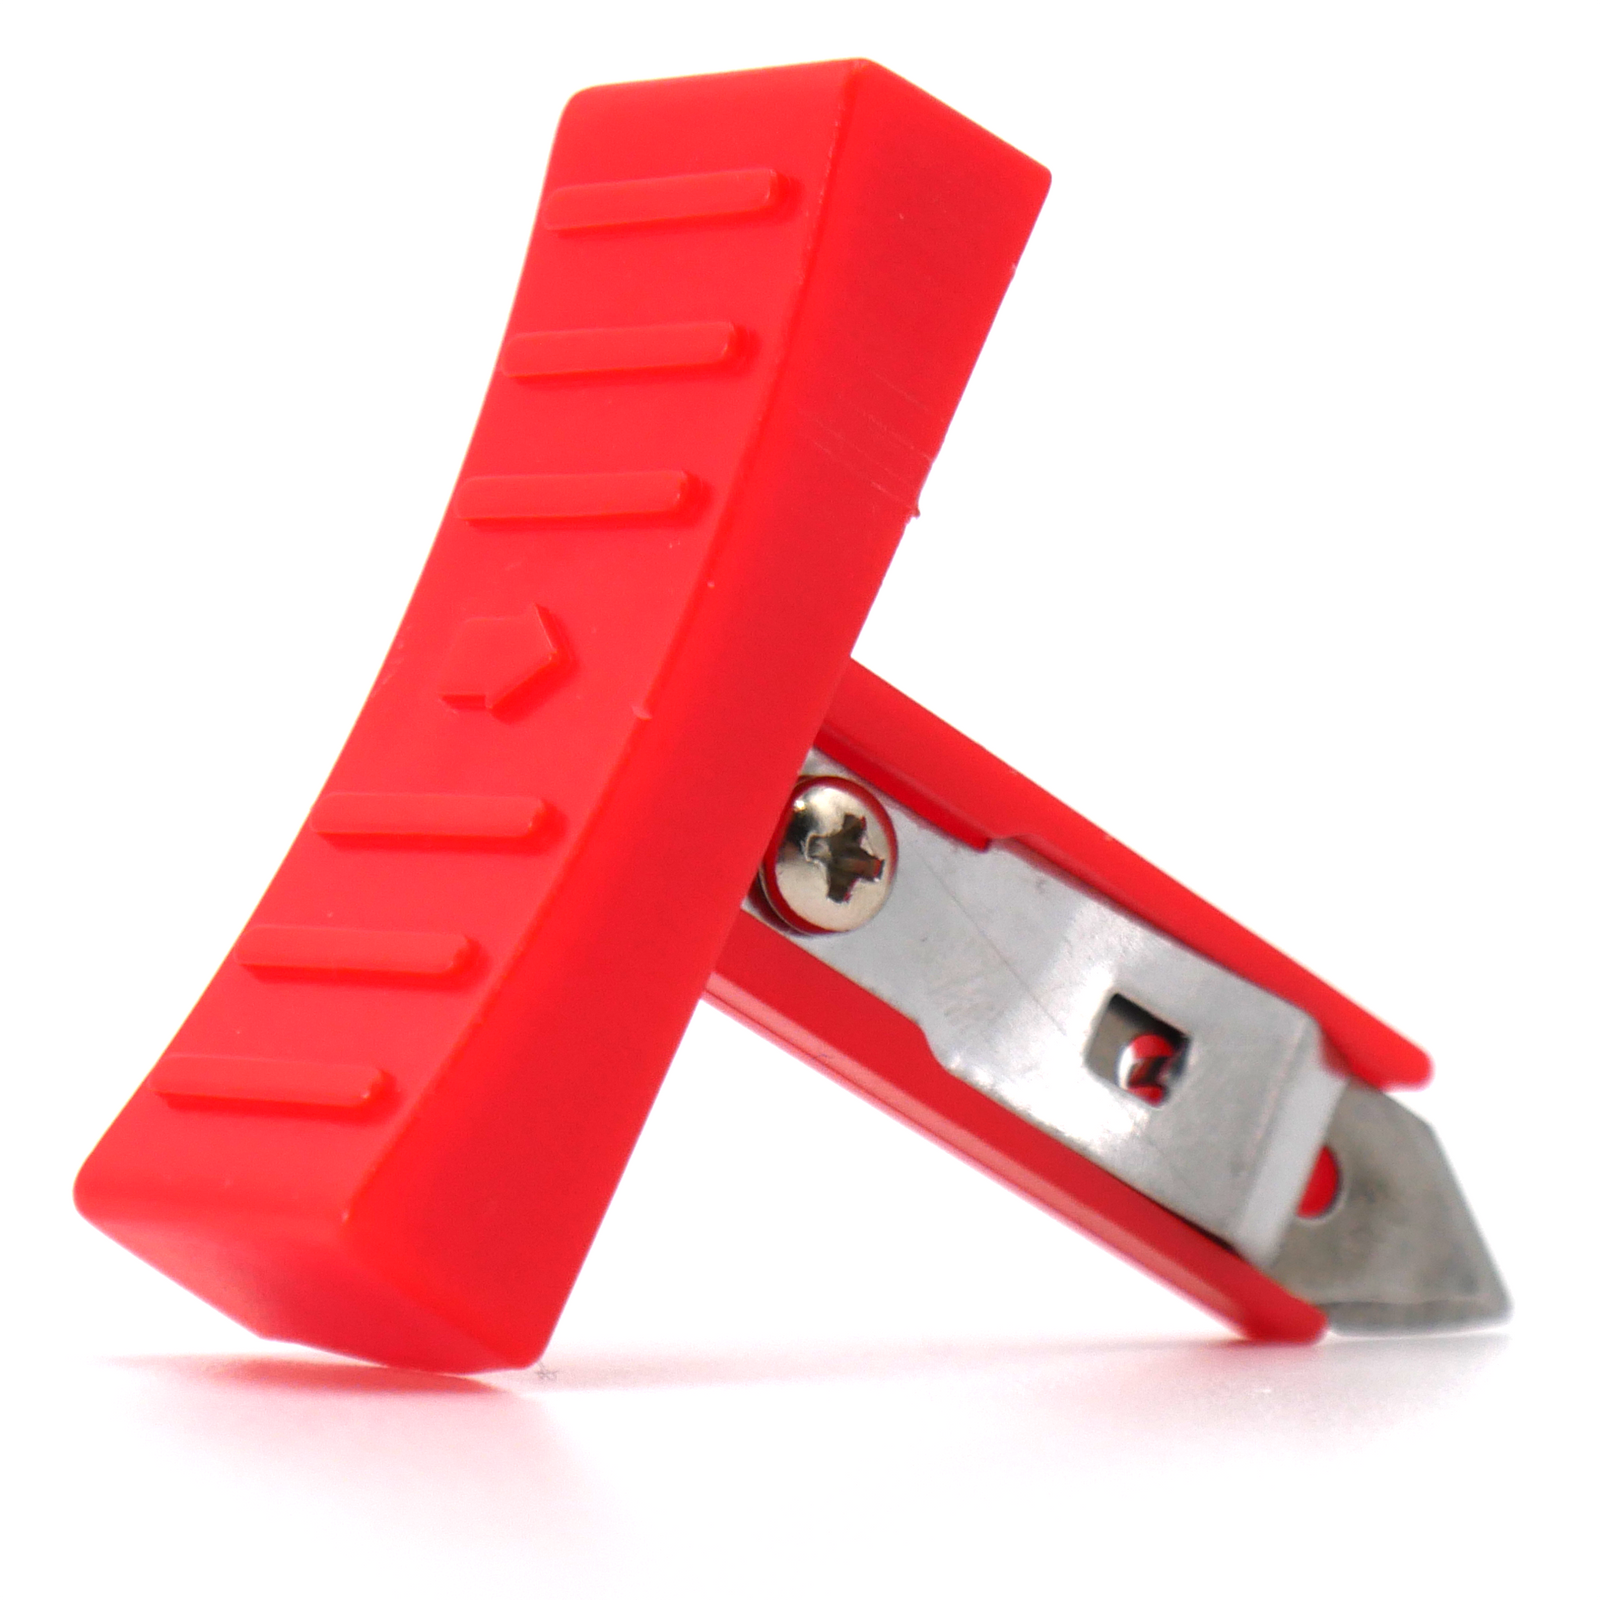 T bar Holder with metal cutting blade used for  JORESTECH Manual impulse sealers with cutters